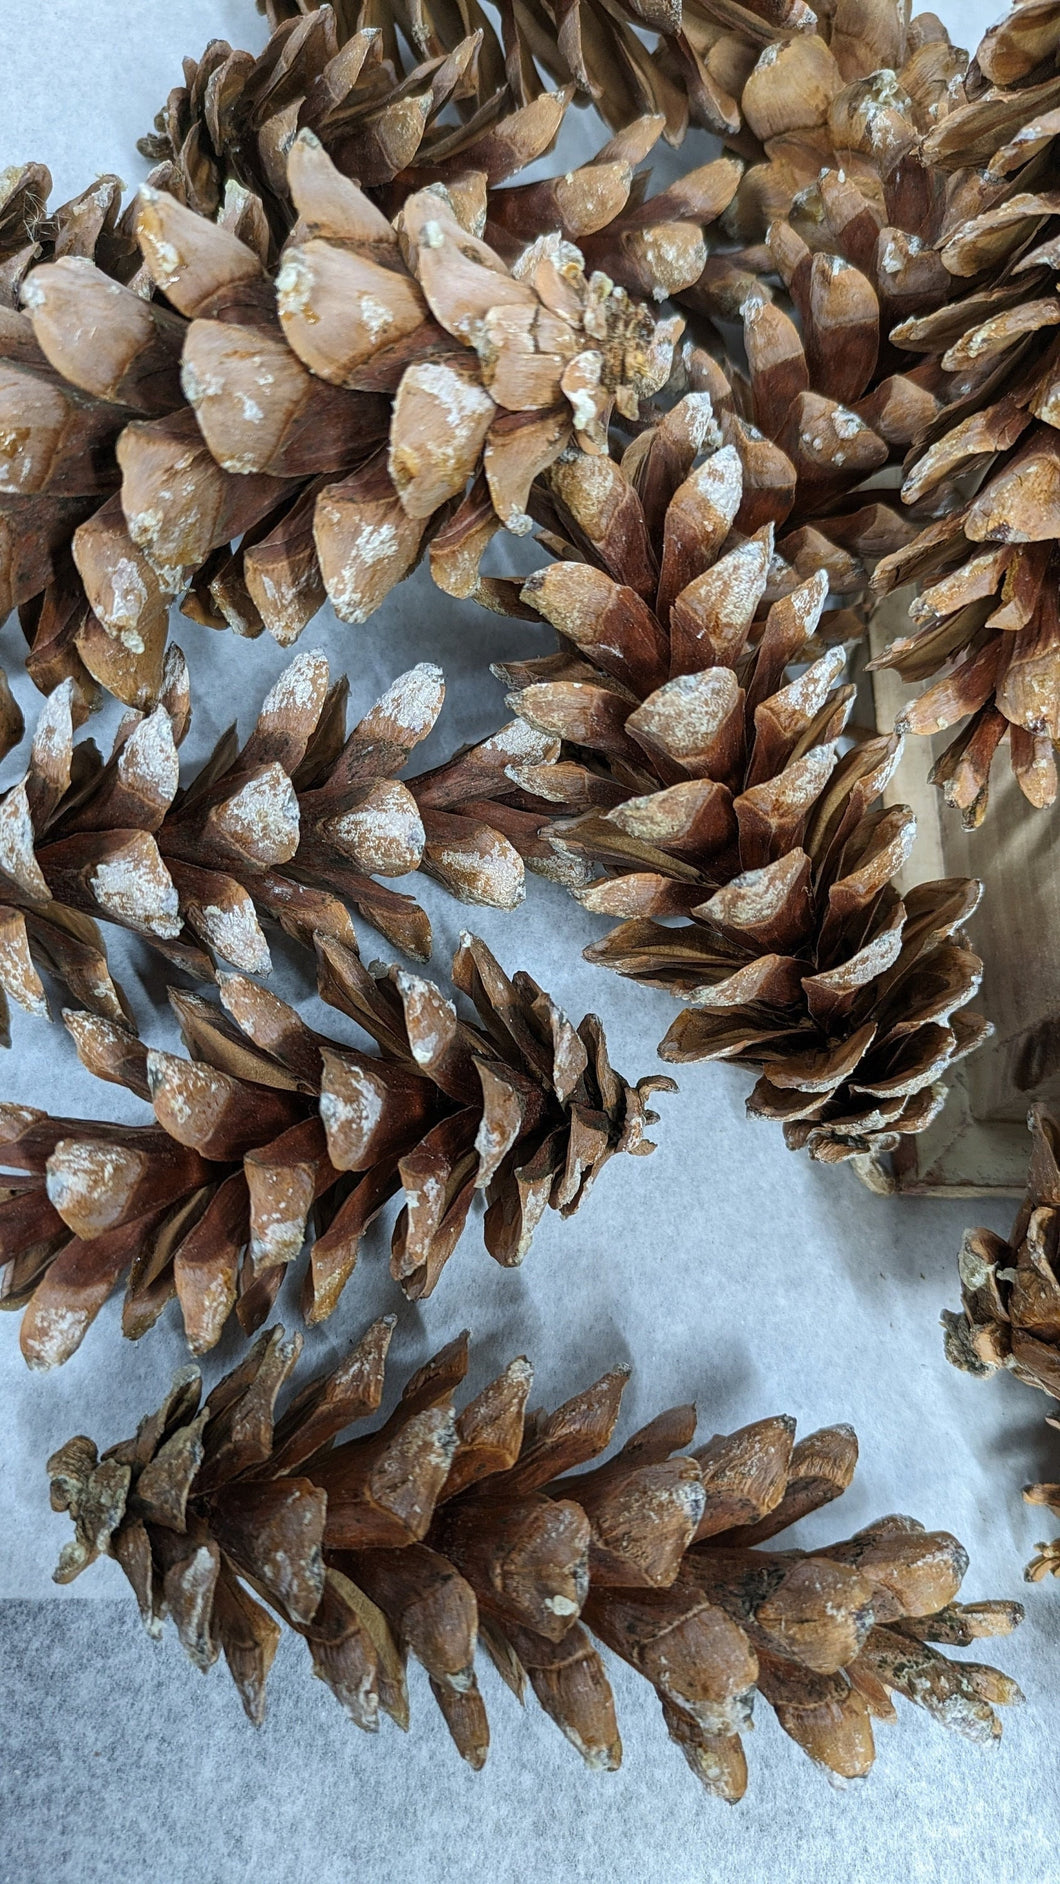 large pine cones from a white pine tree sold in quantities of 20